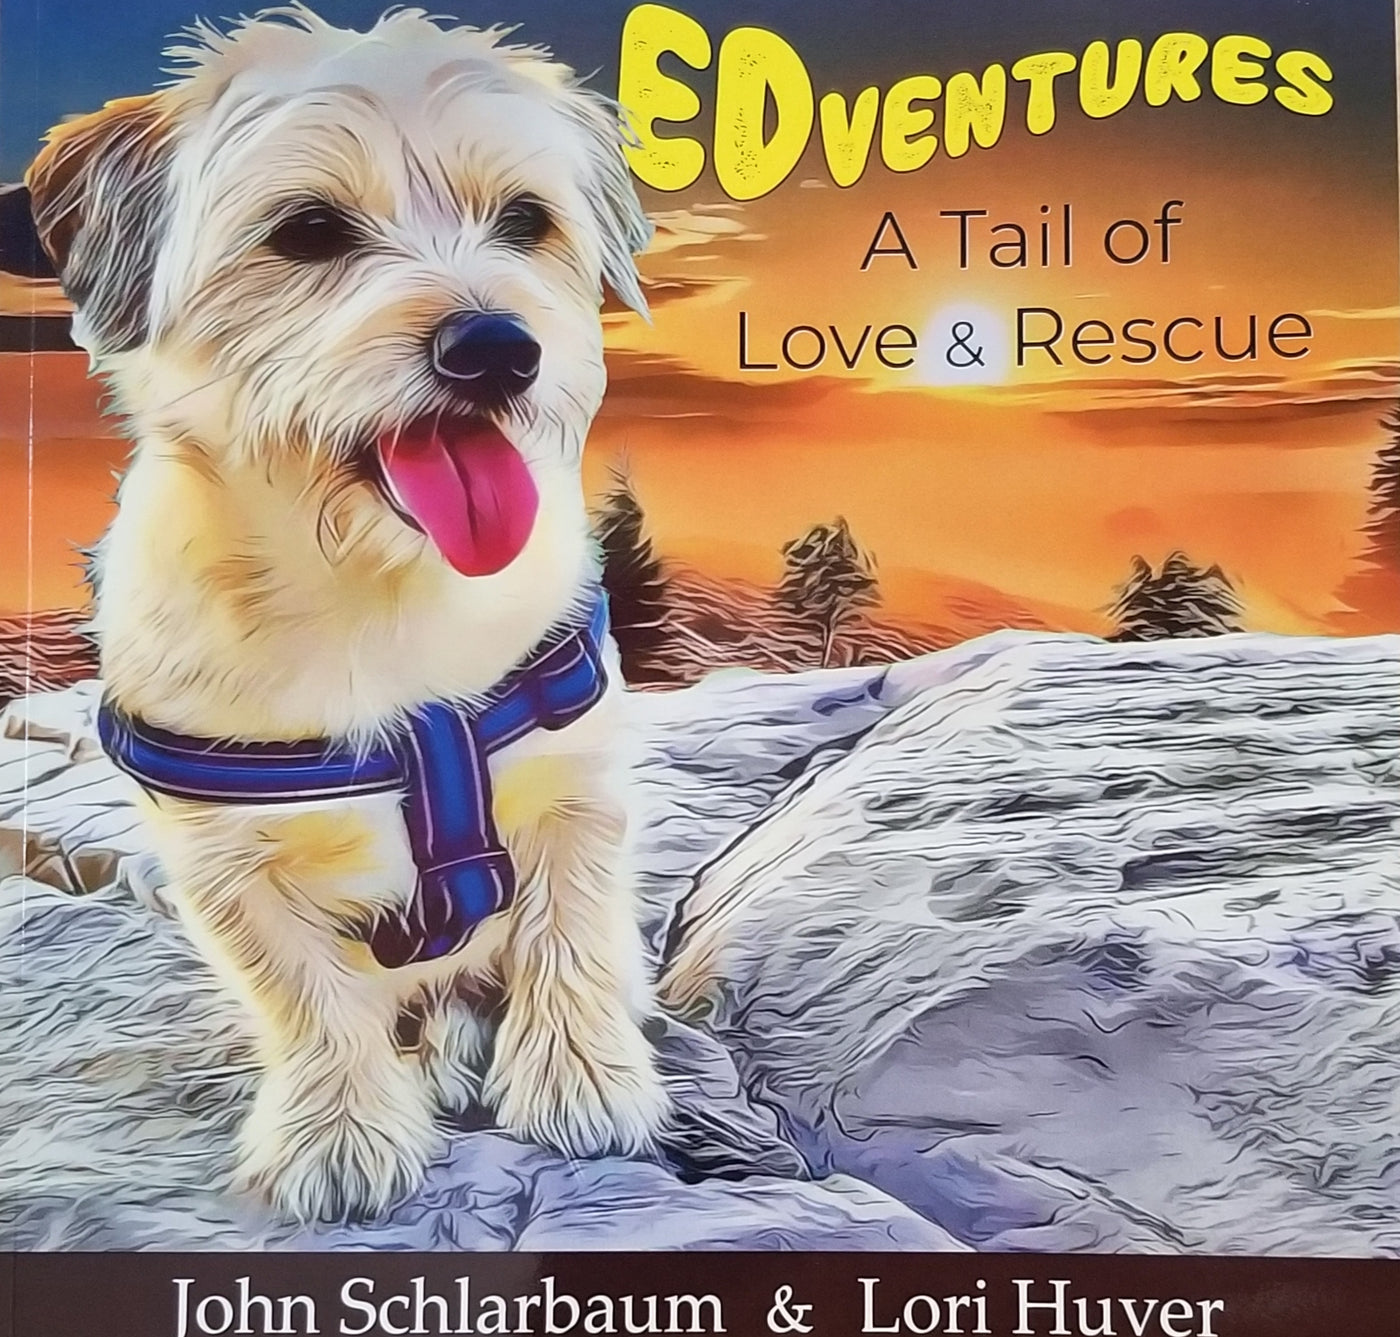 EDventures: A Tail of Love & Rescue